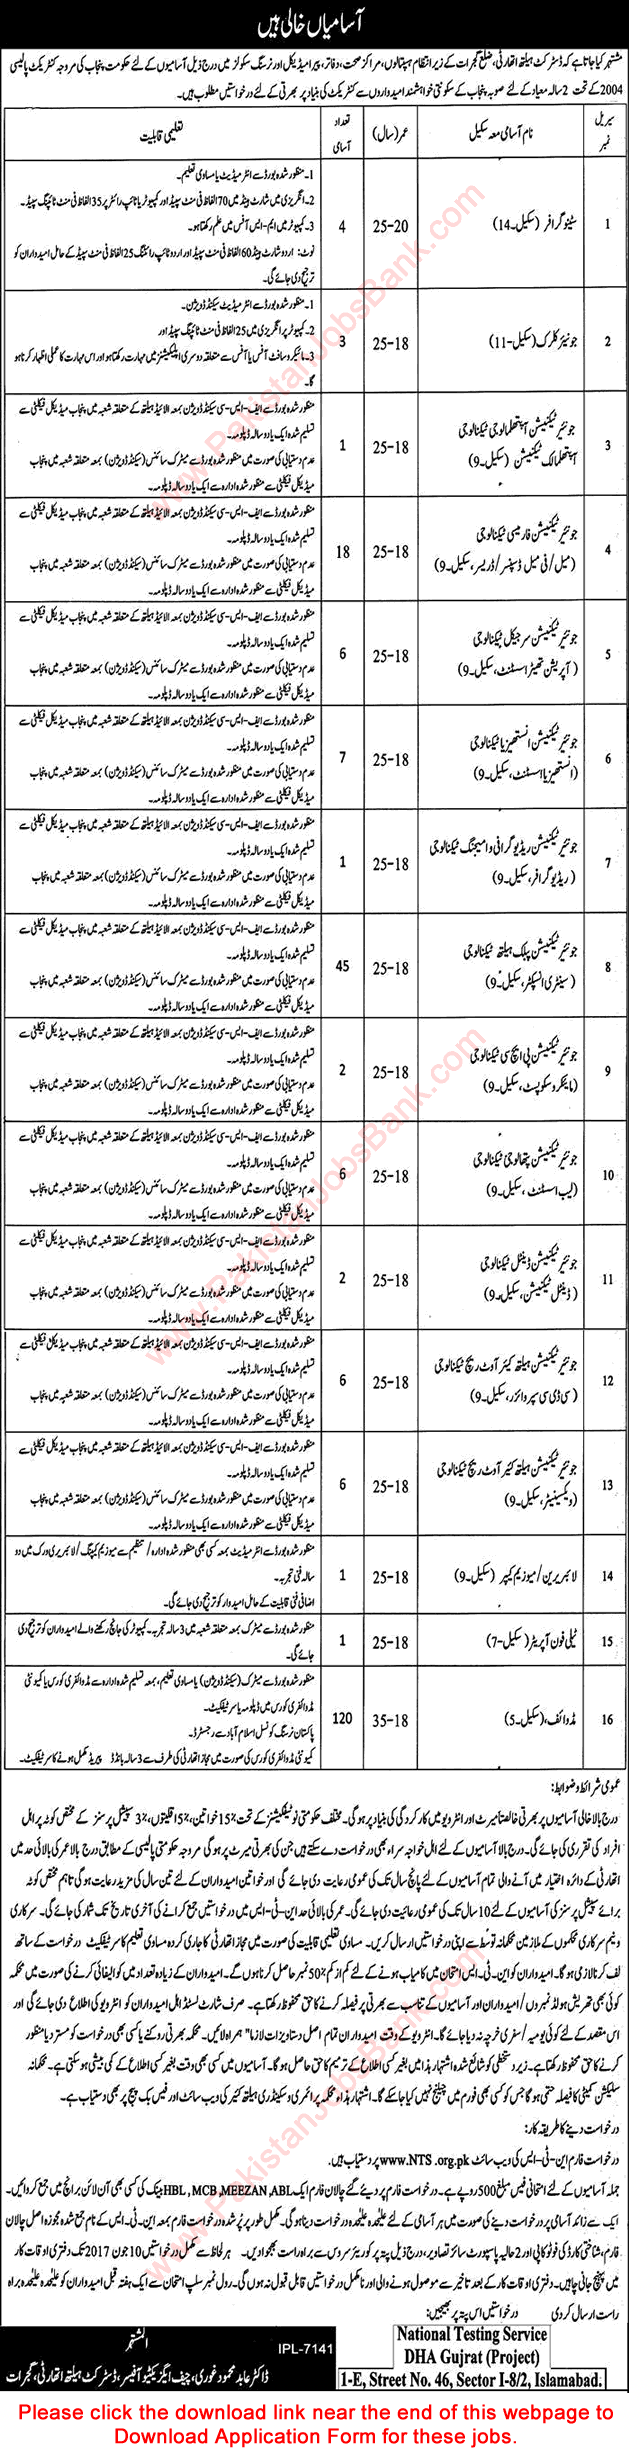 Health Department Gujrat Jobs May 2017 June NTS Application Form Midwives, Sanitary Inspectors & Others Latest